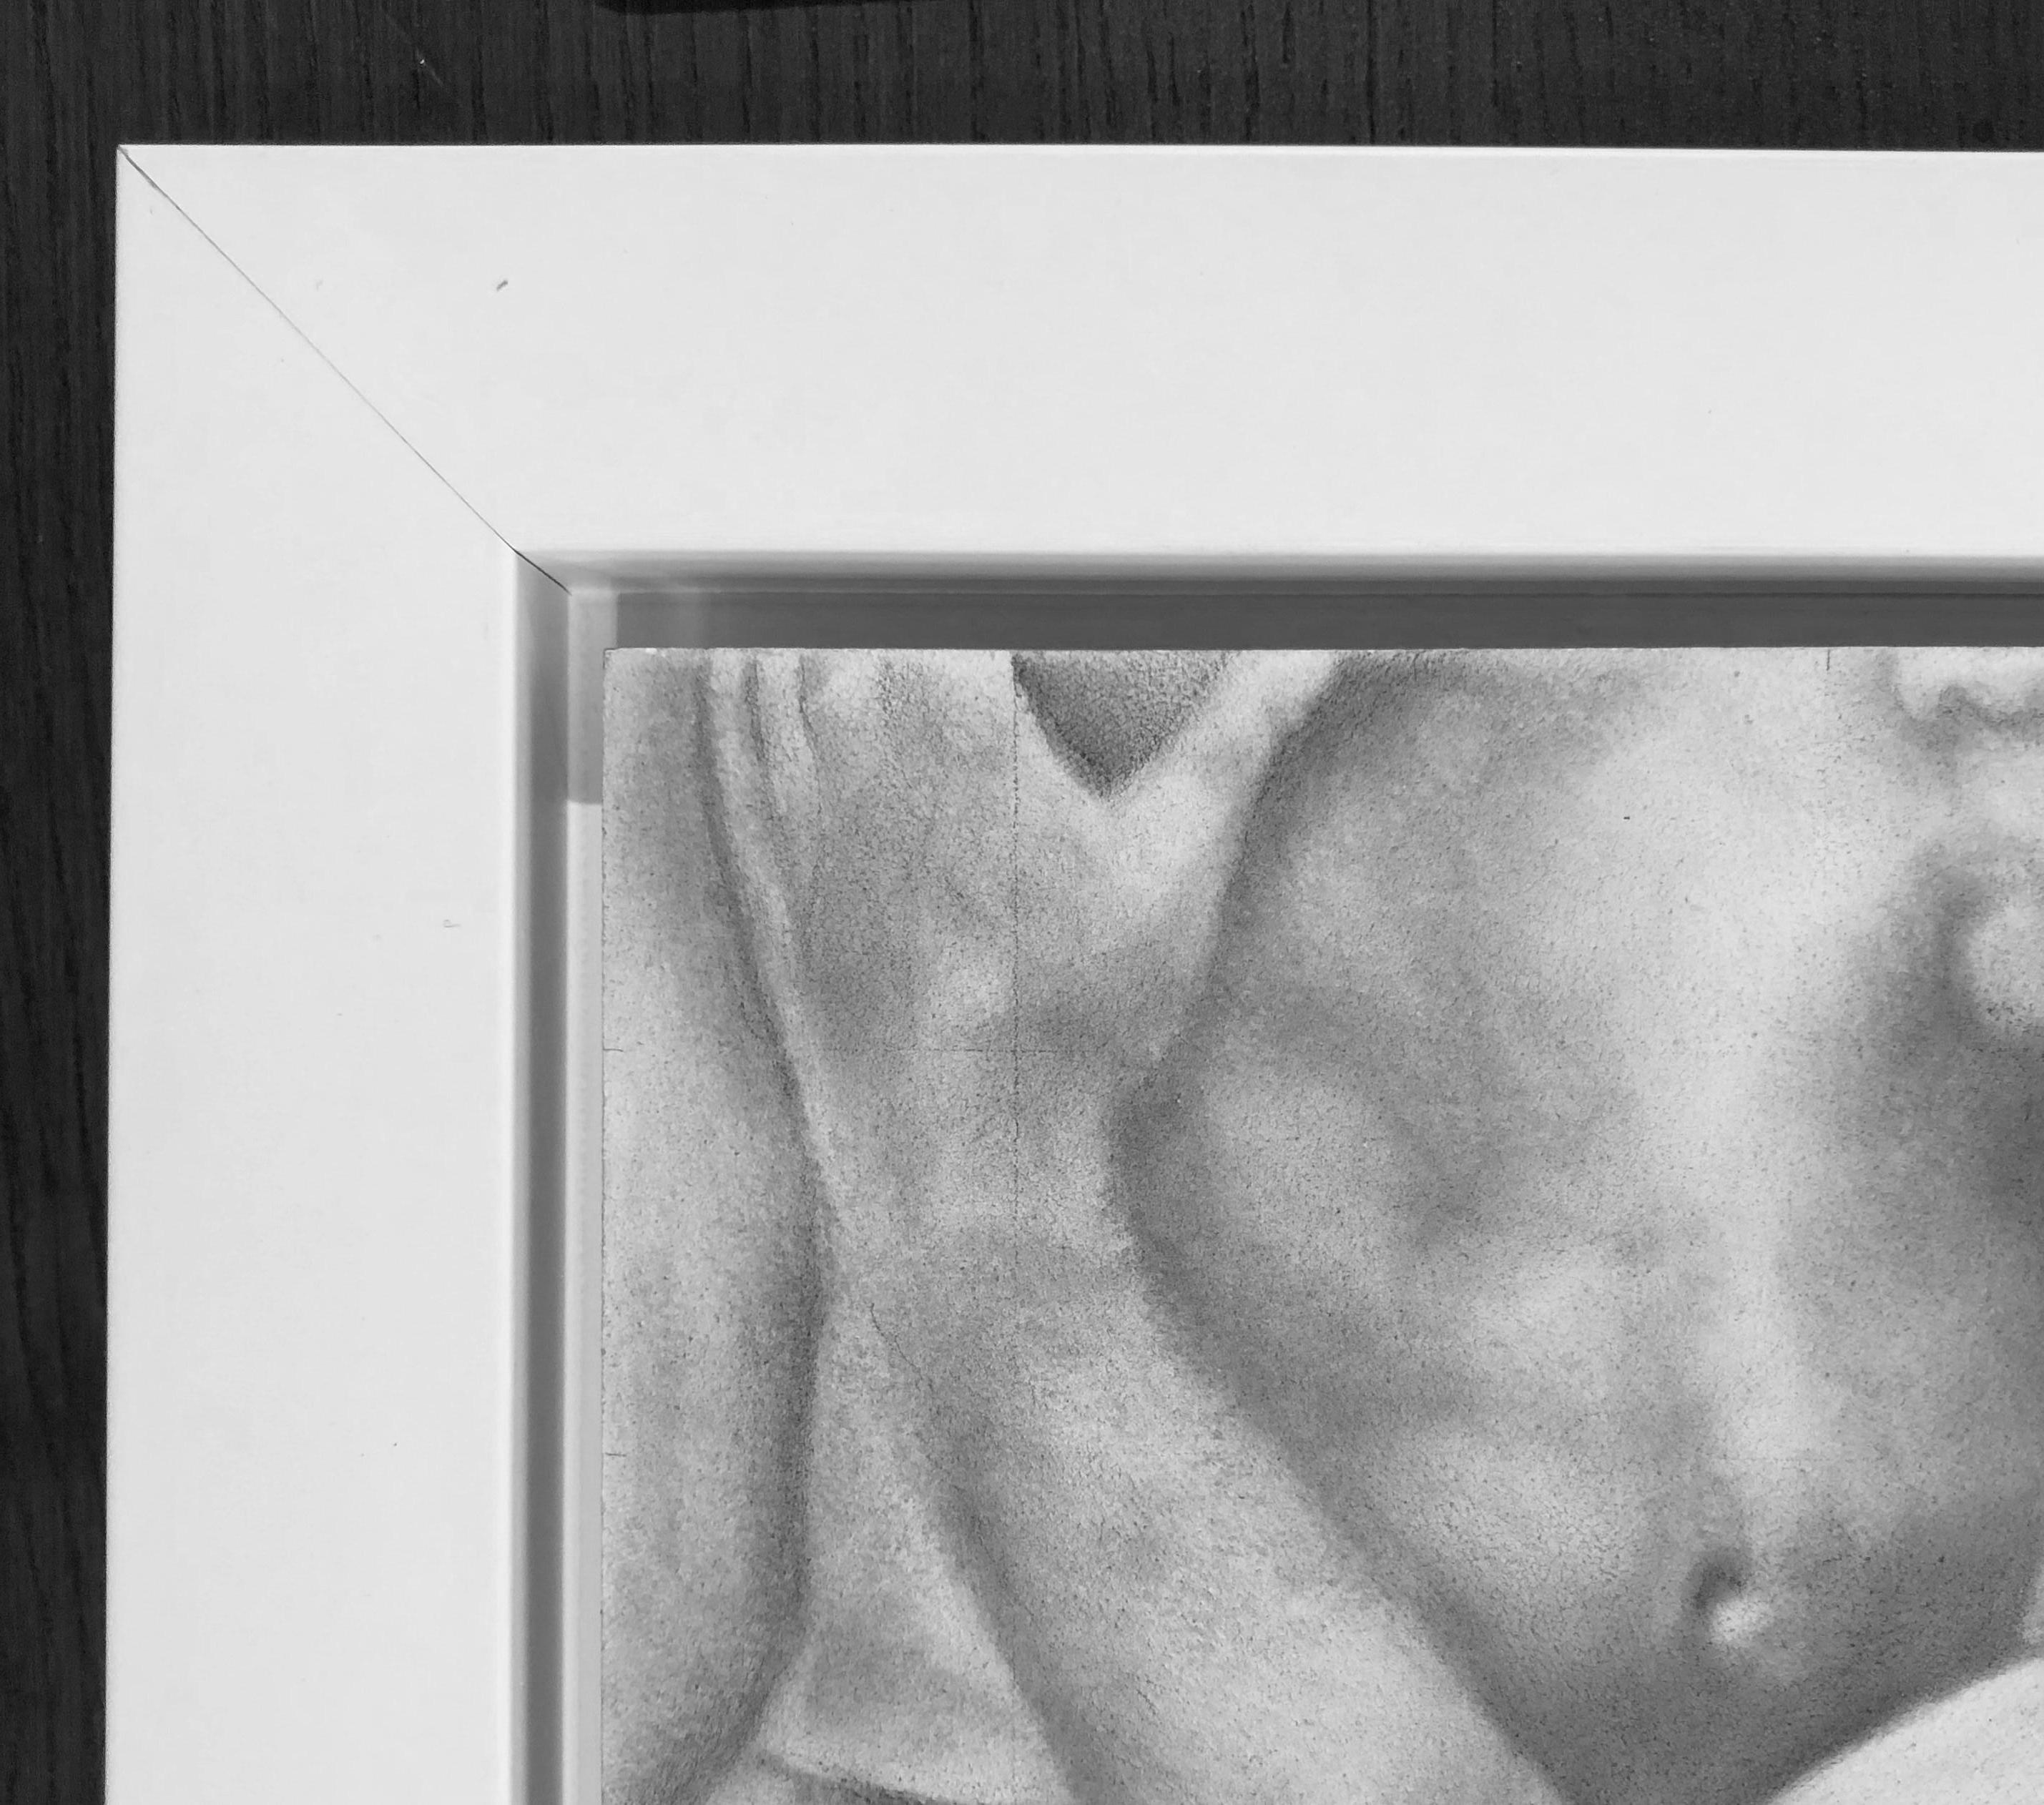 Proximity - Embracing Nude Figures, Original Graphite Drawing on Panel - Gray Figurative Art by Rick Sindt